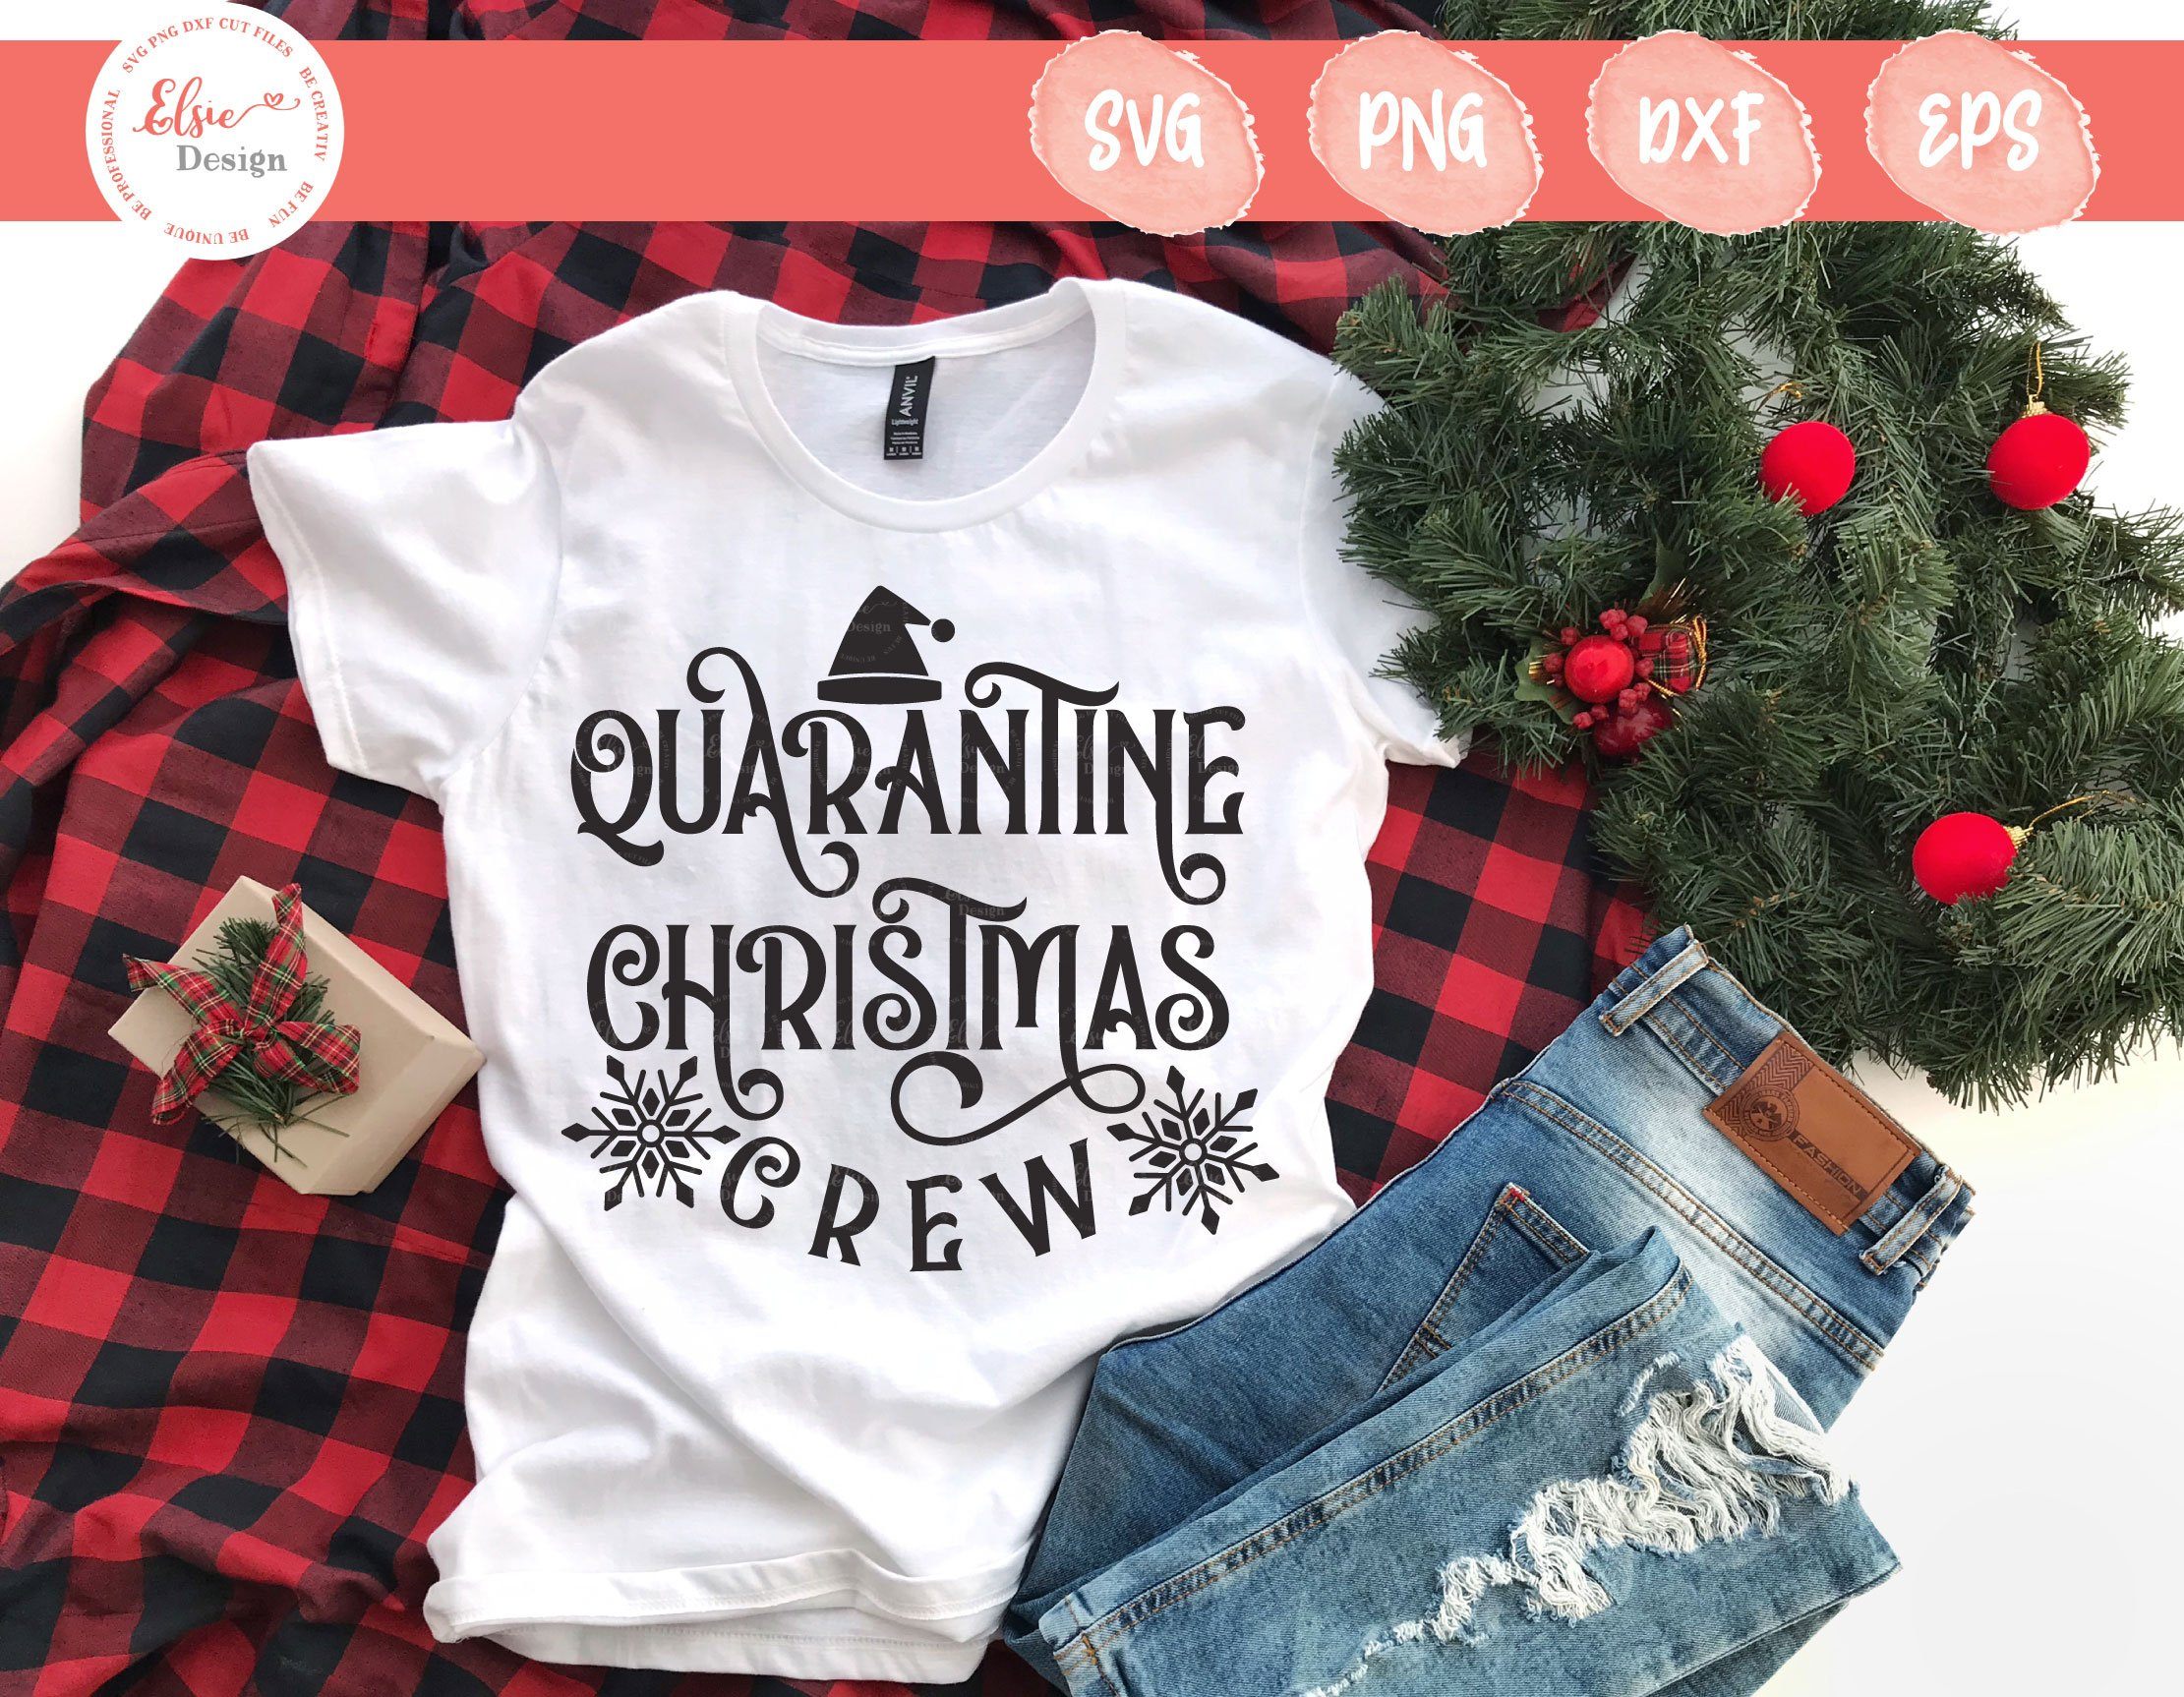 Download Quarantine Christmas Crew Svg Png Dxf Eps So Fontsy